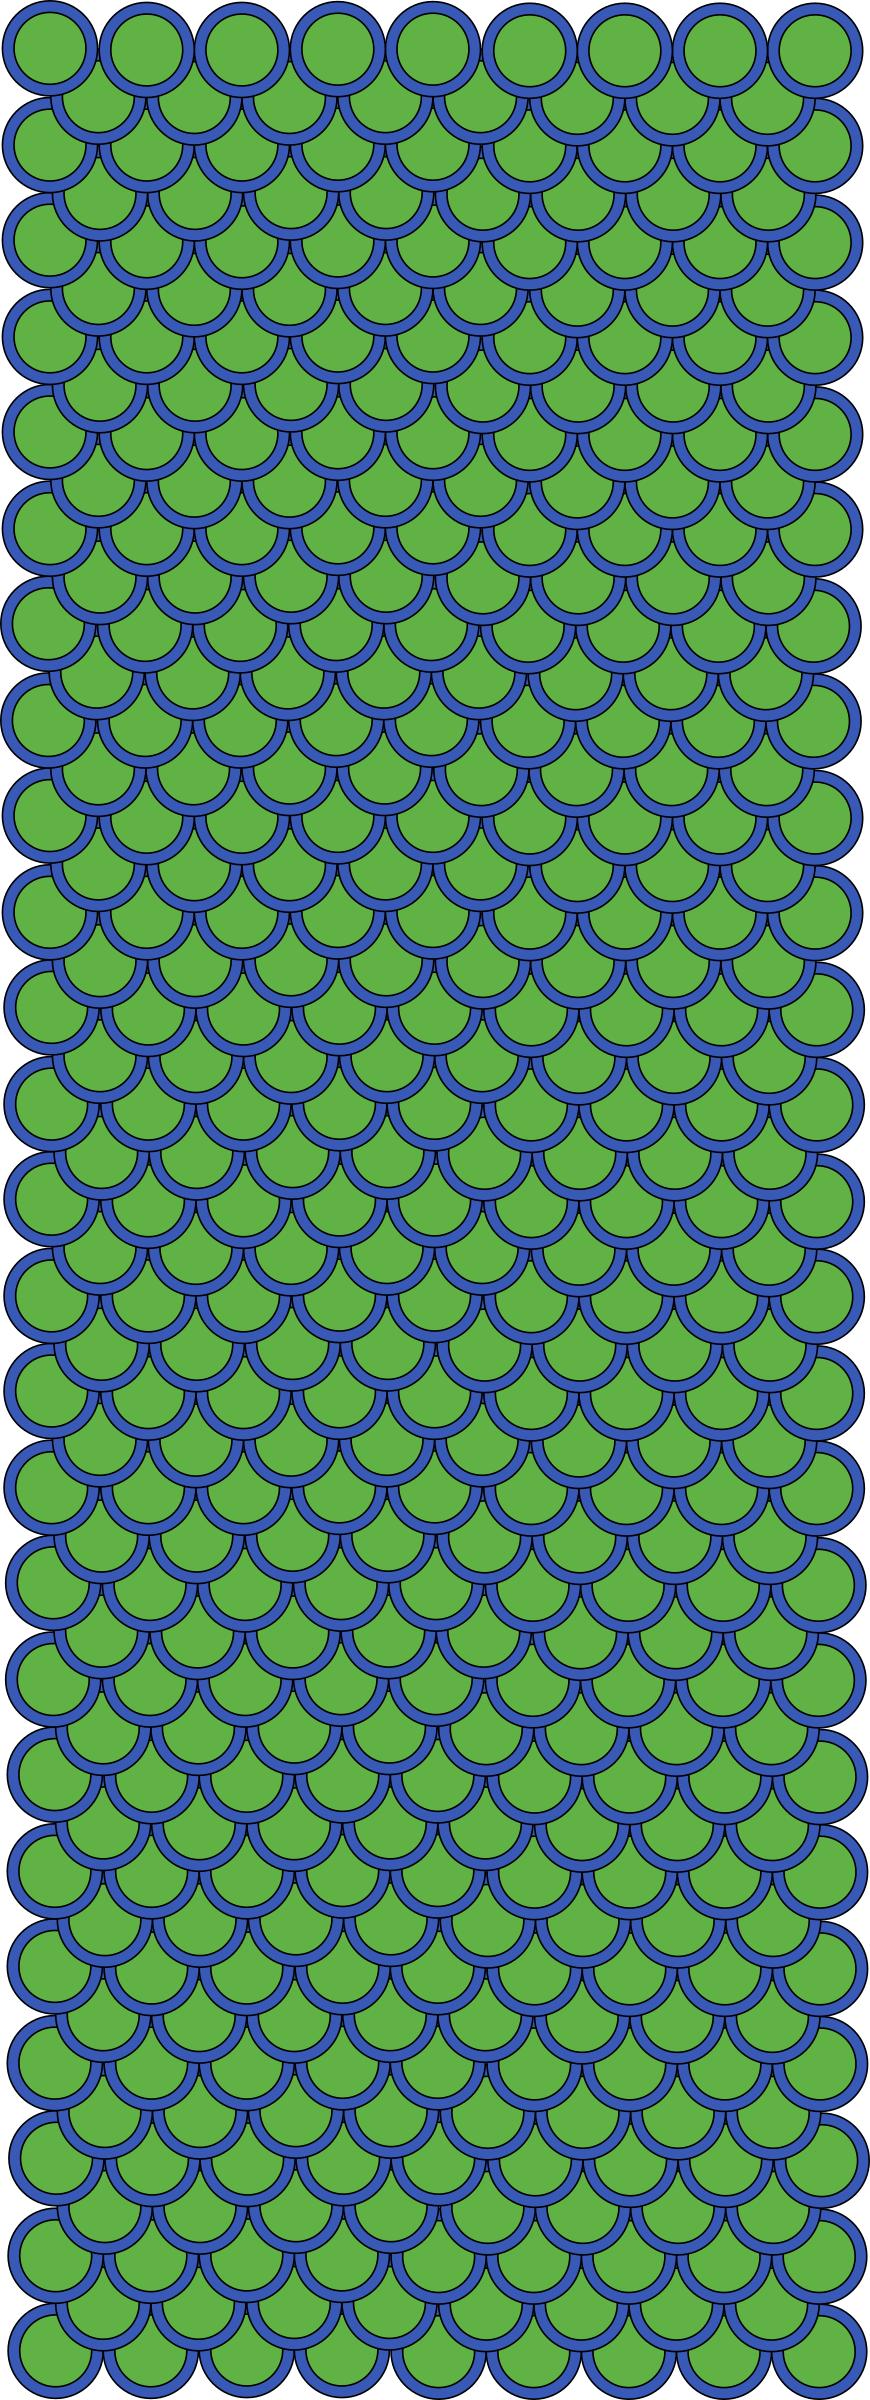 Fish scales png